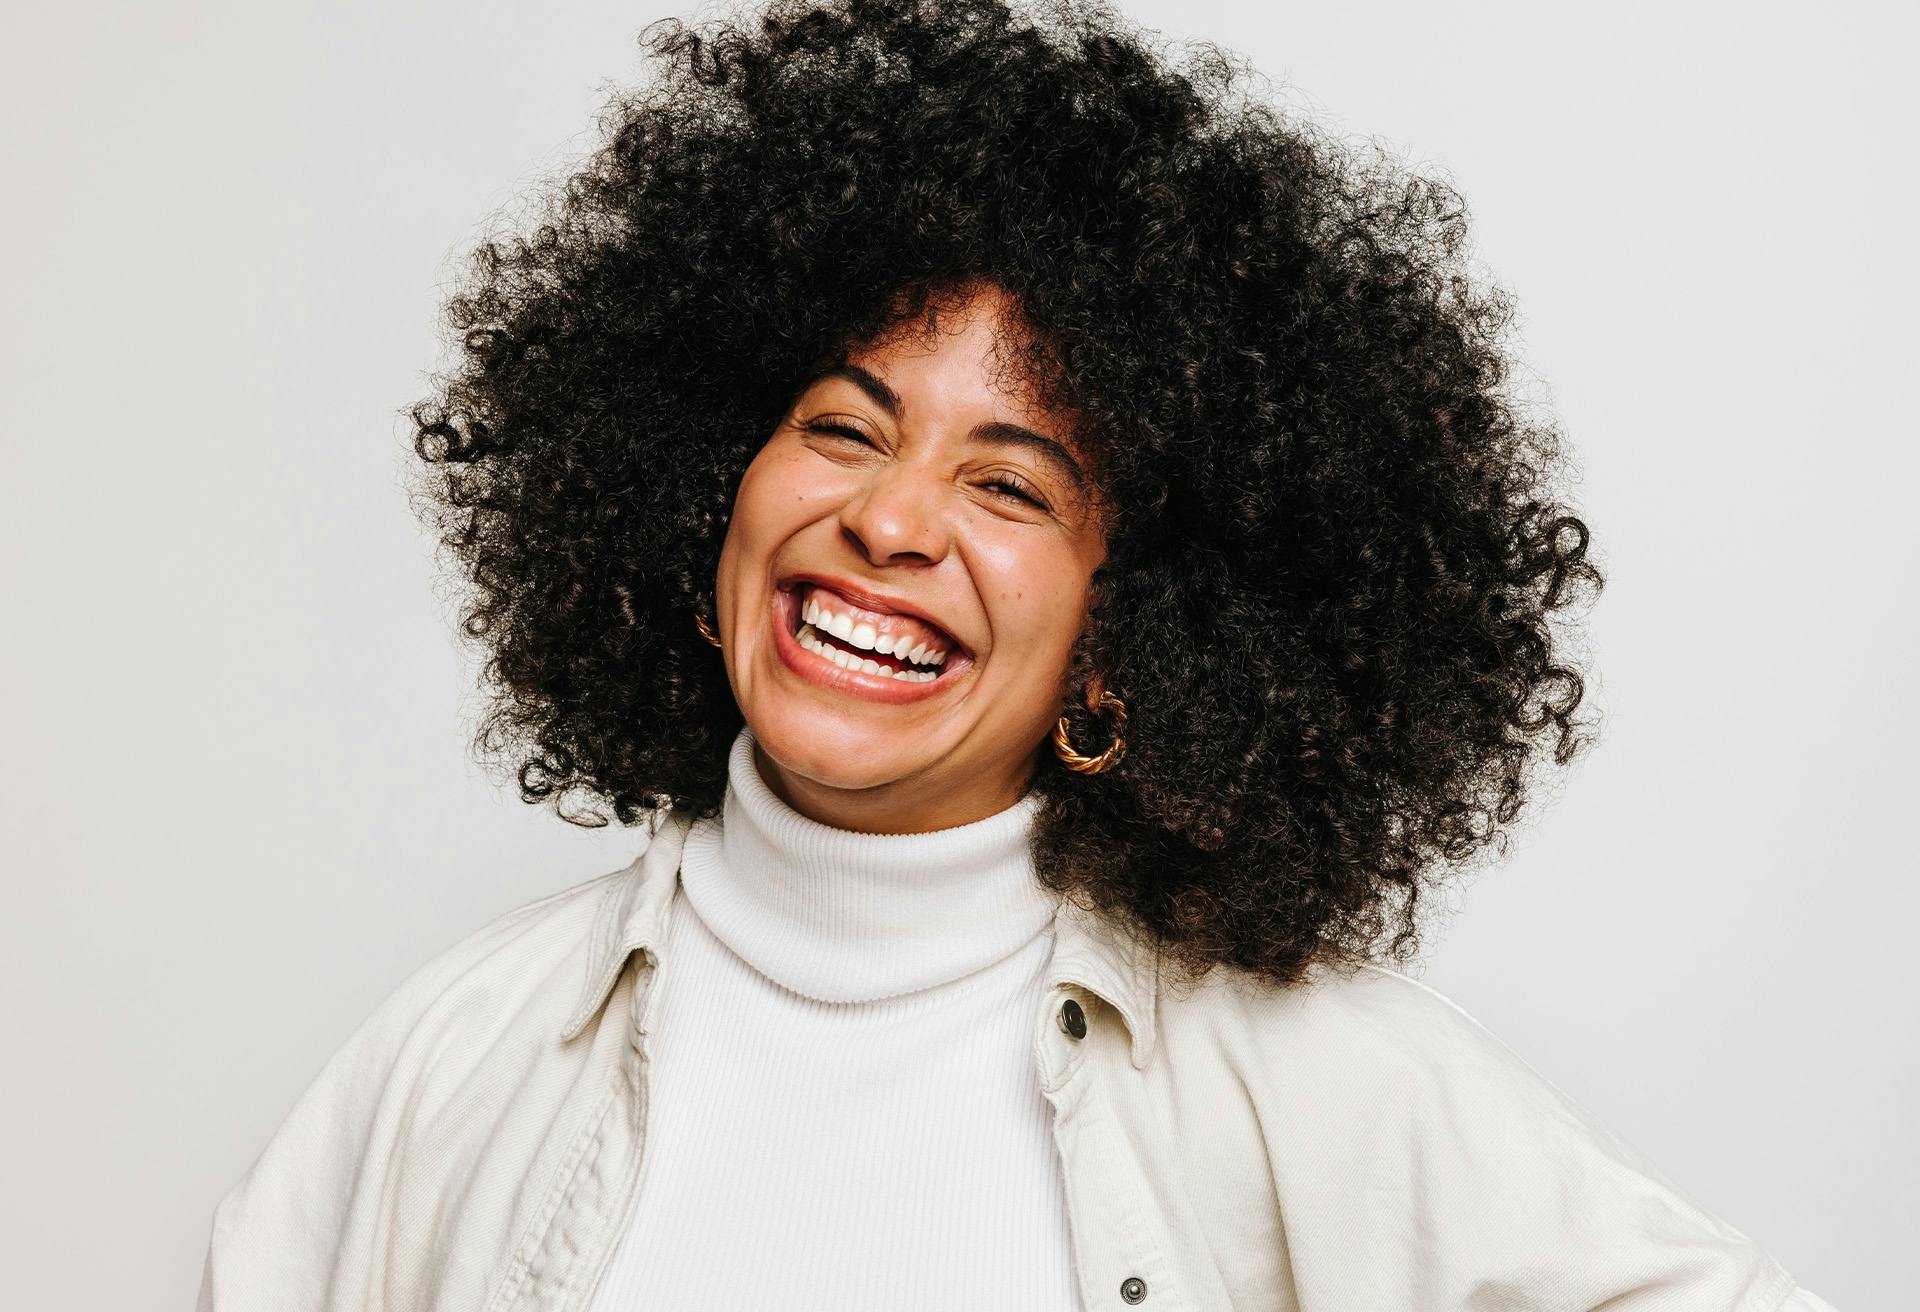 Woman with big curly black hair smiling